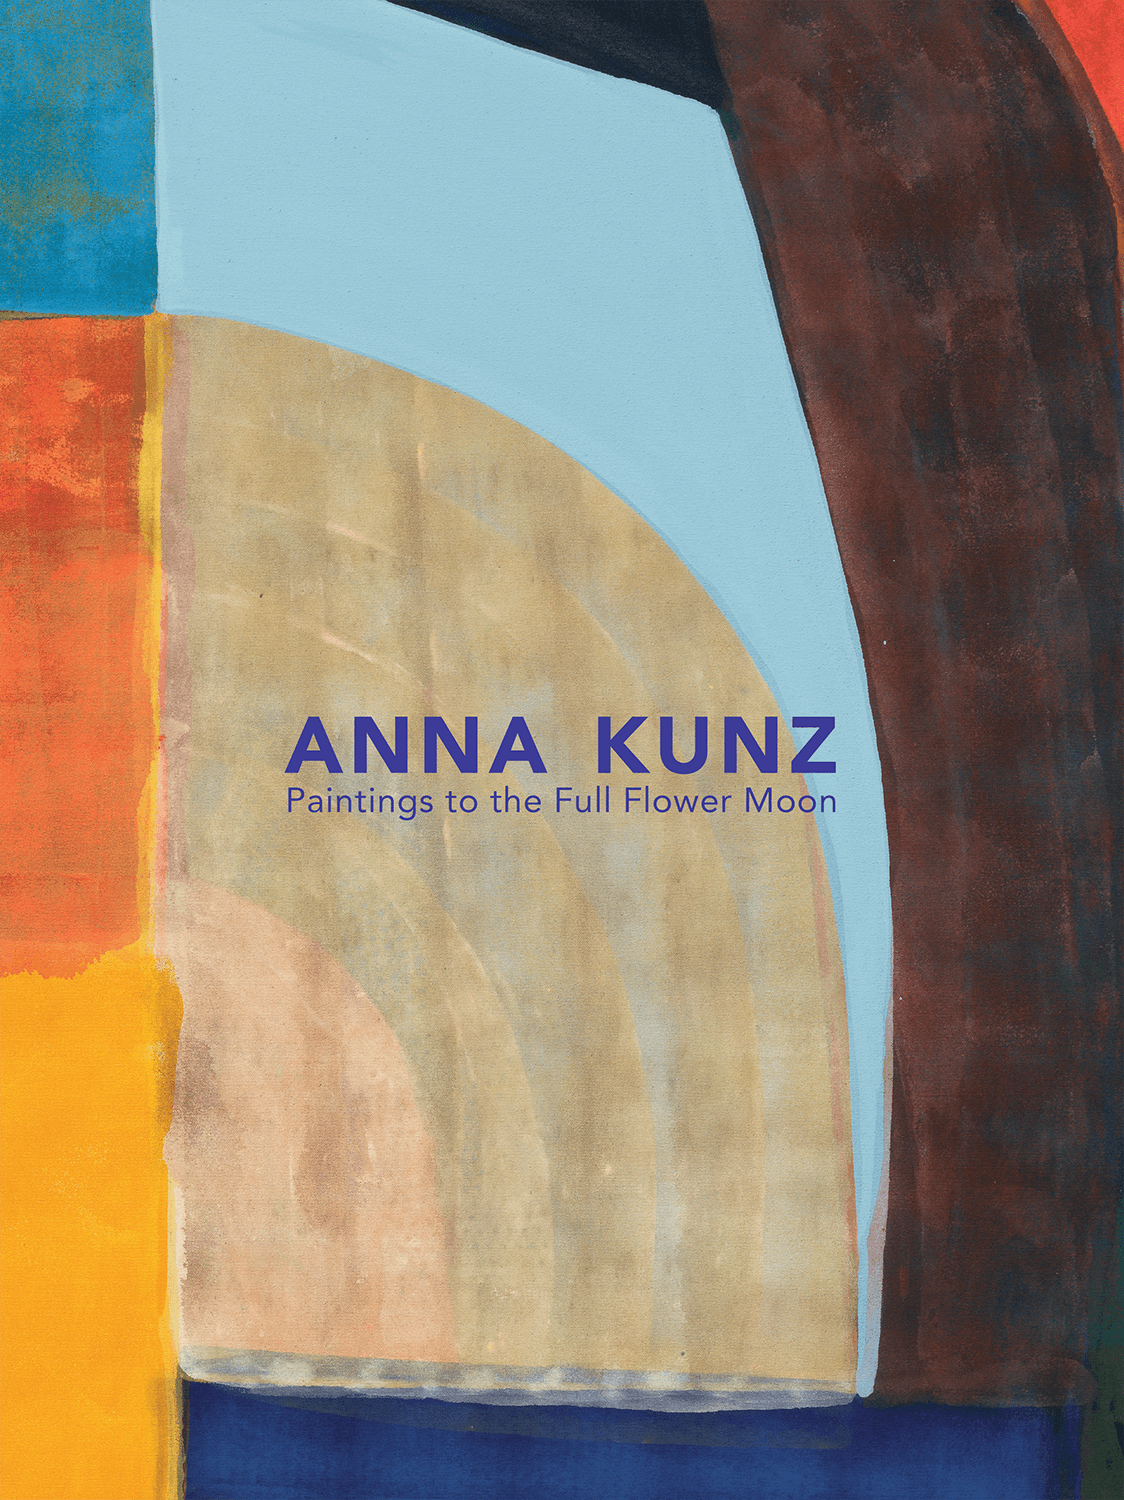 Anna Kunz Paintings to the Full Flower Moon exhibition catalogue